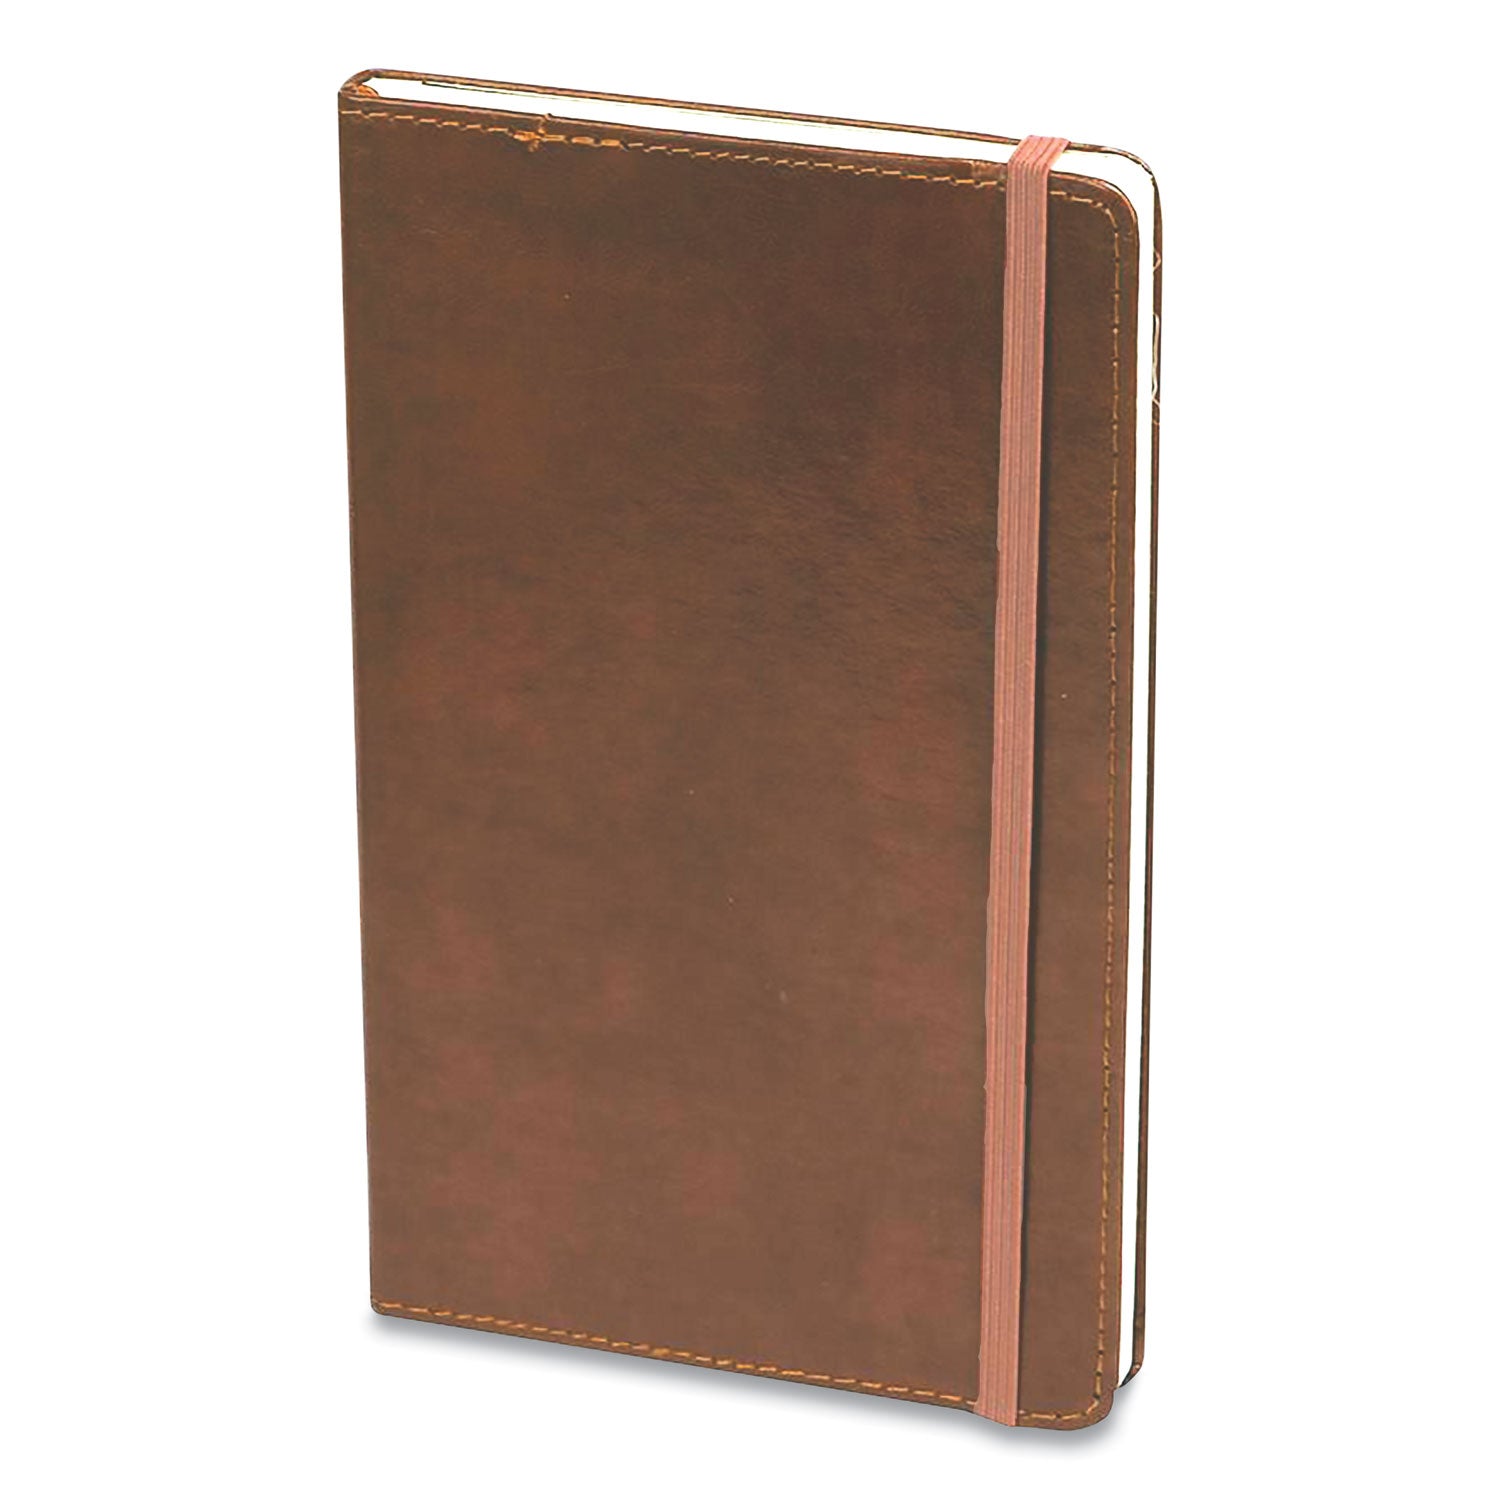 bonded-leather-journal-1-subject-narrow-rule-brown-cover-240-825-x-5-sheets_cgbmj54792 - 2